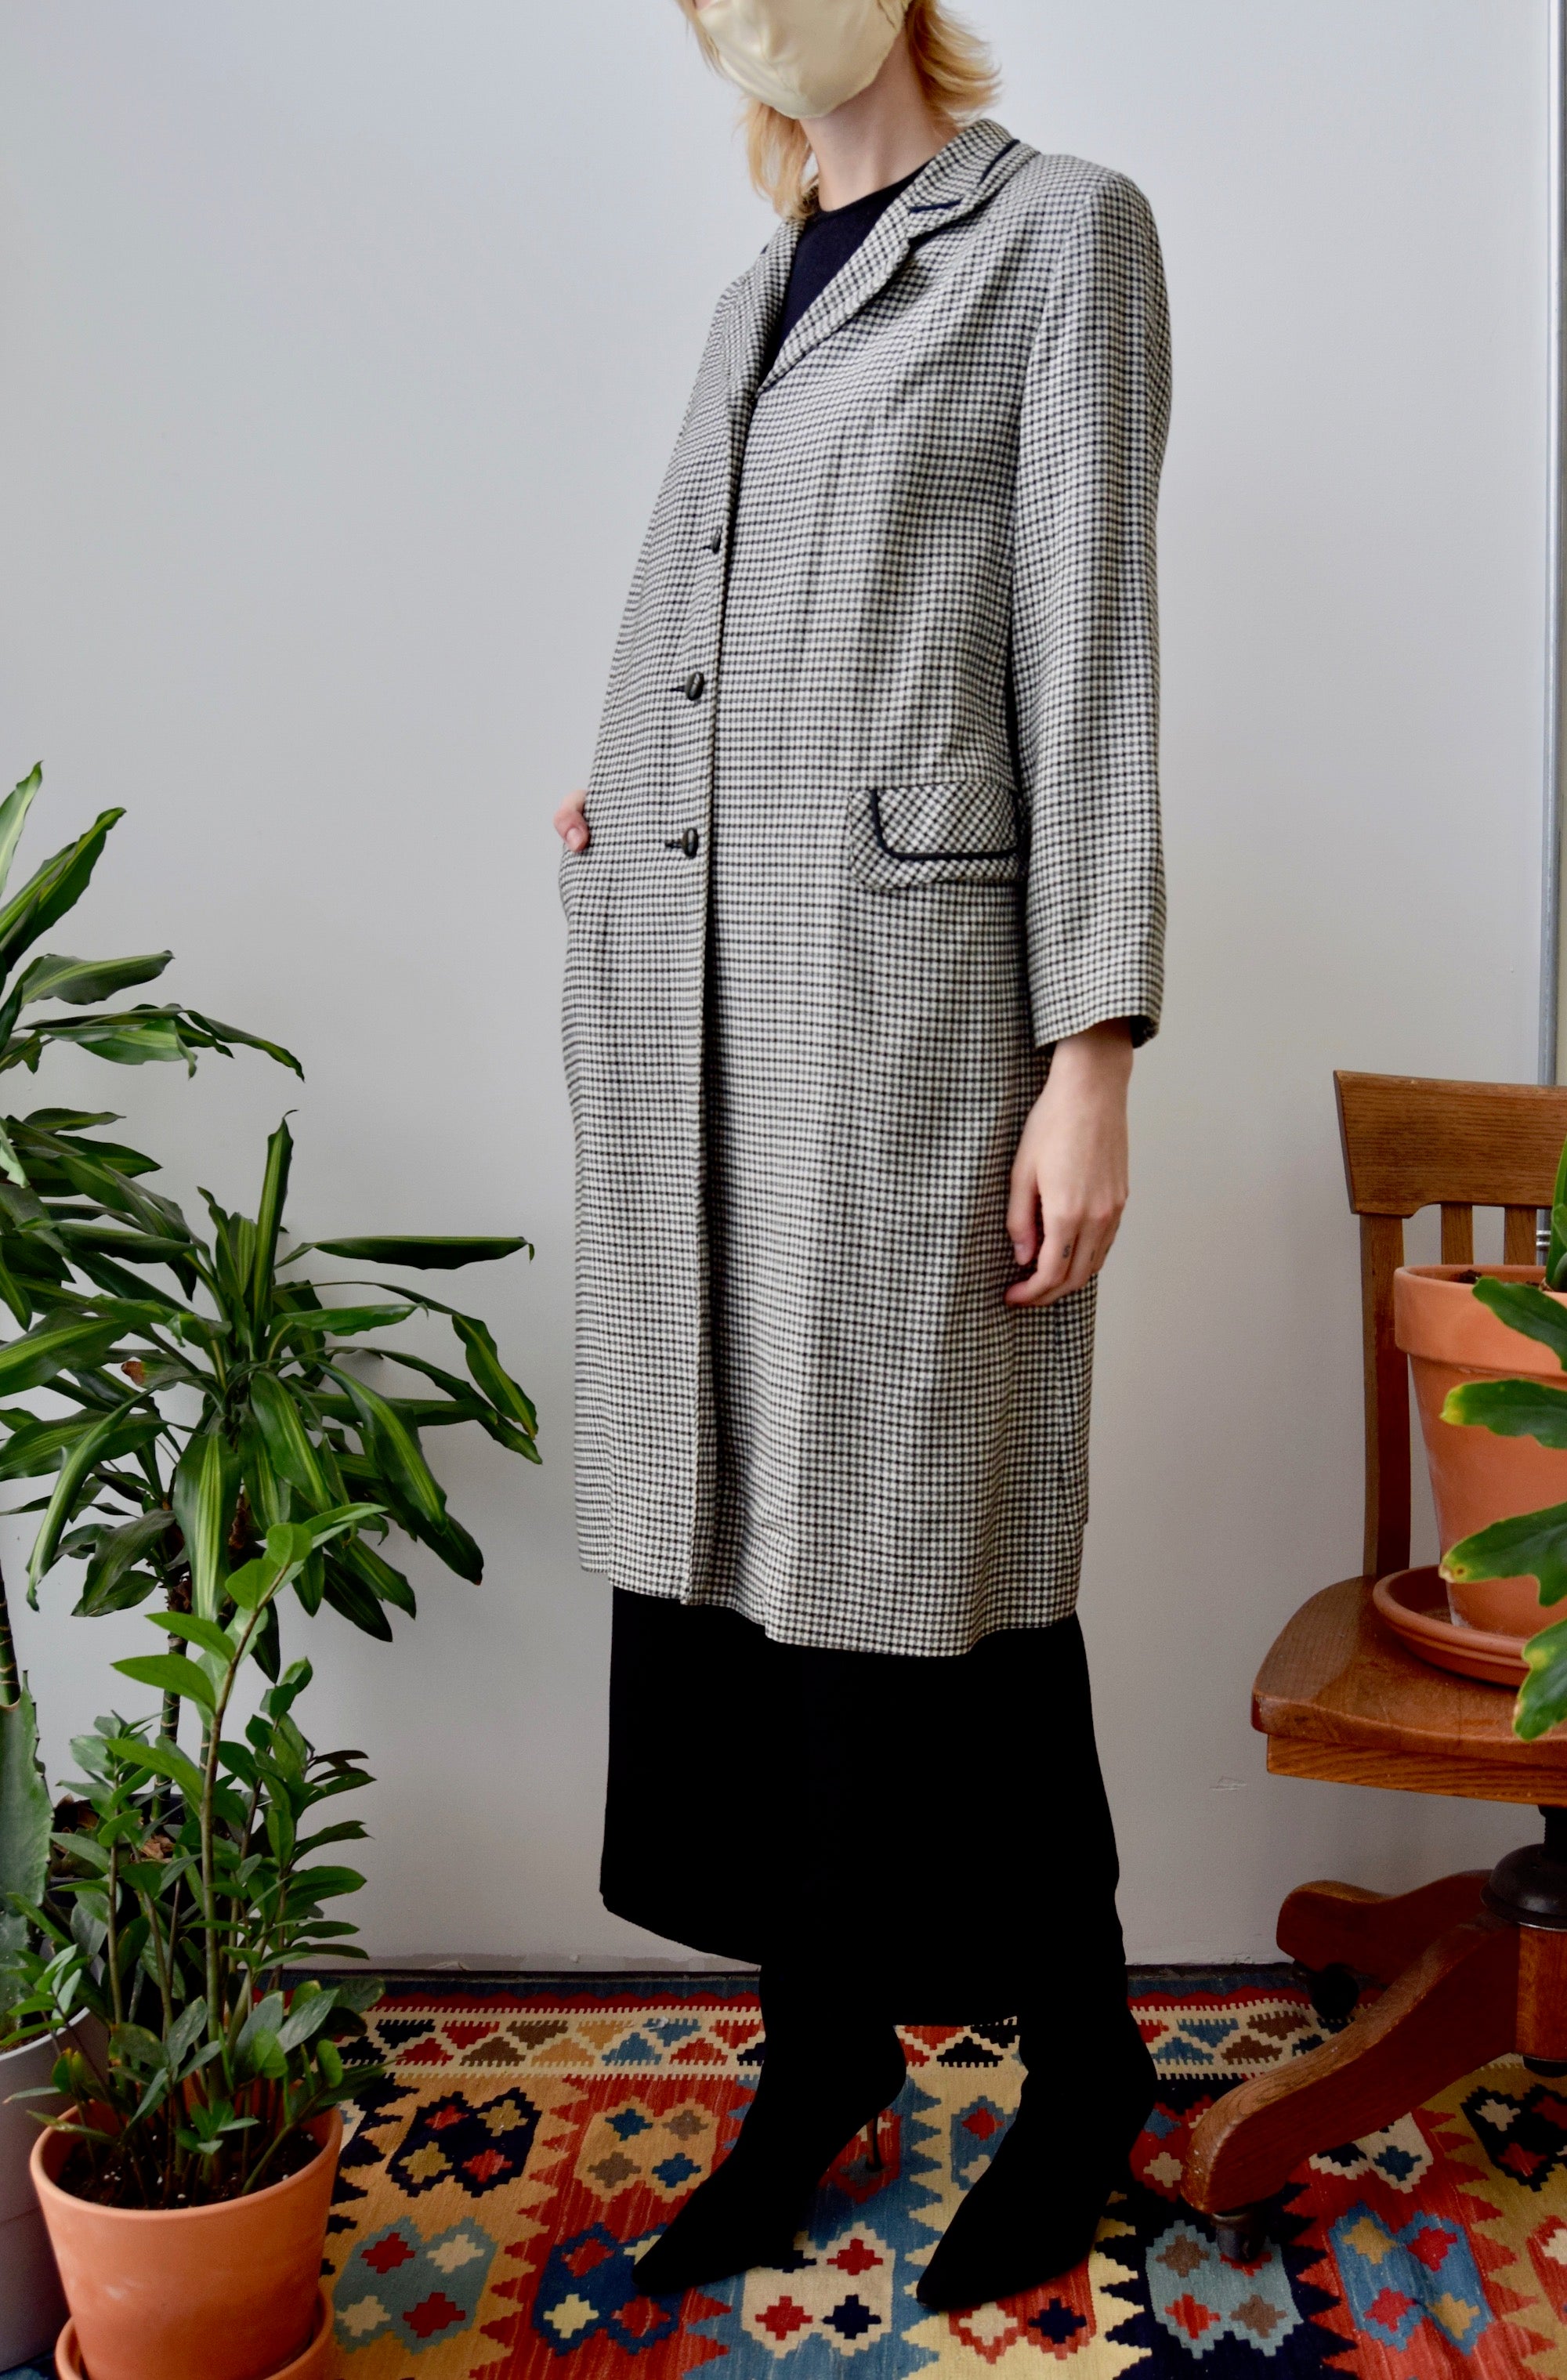 Vintage Houndstooth Trench Coat